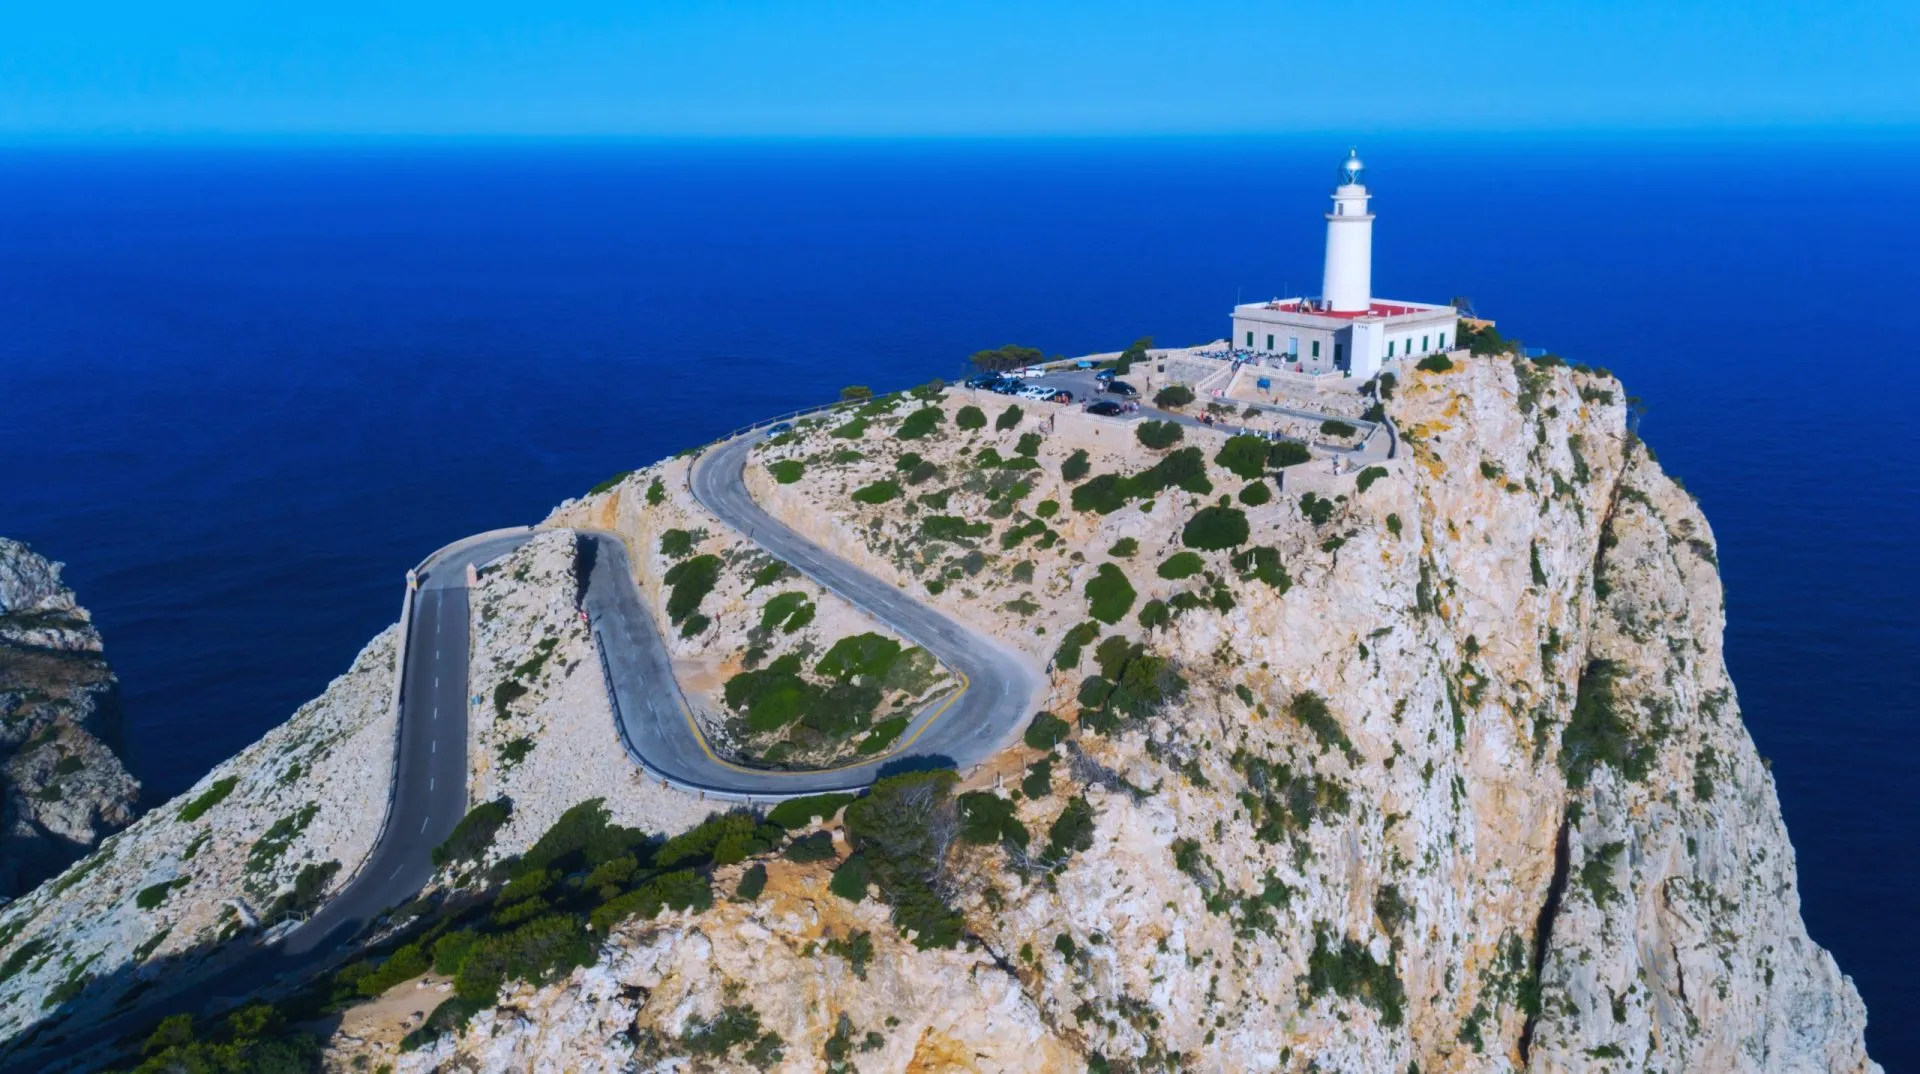 Aerial view of lighthouse at Cape Formentor in the Coast of North Mallorca, Spain (Balearic Islands).